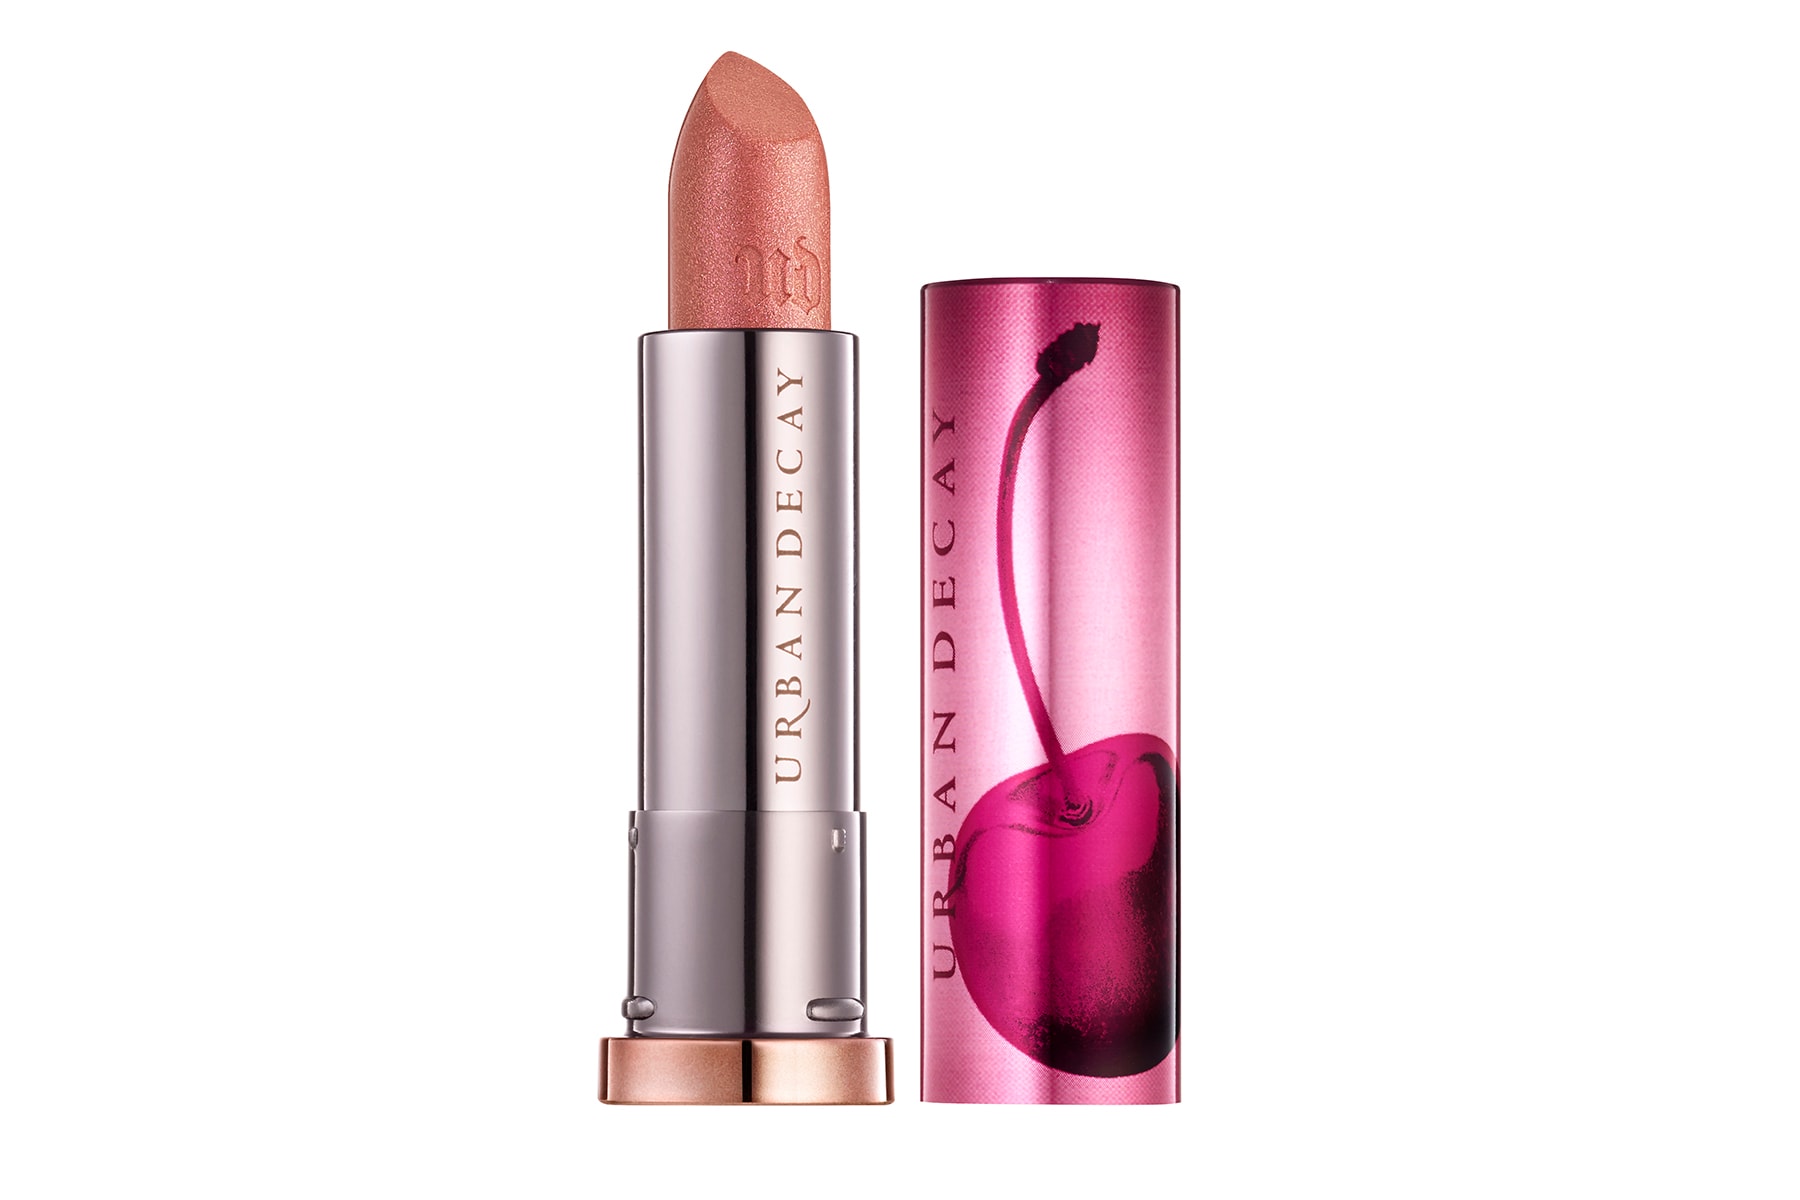 Urban Decay Naked Cherry Vice Lipstick Juicy Nude